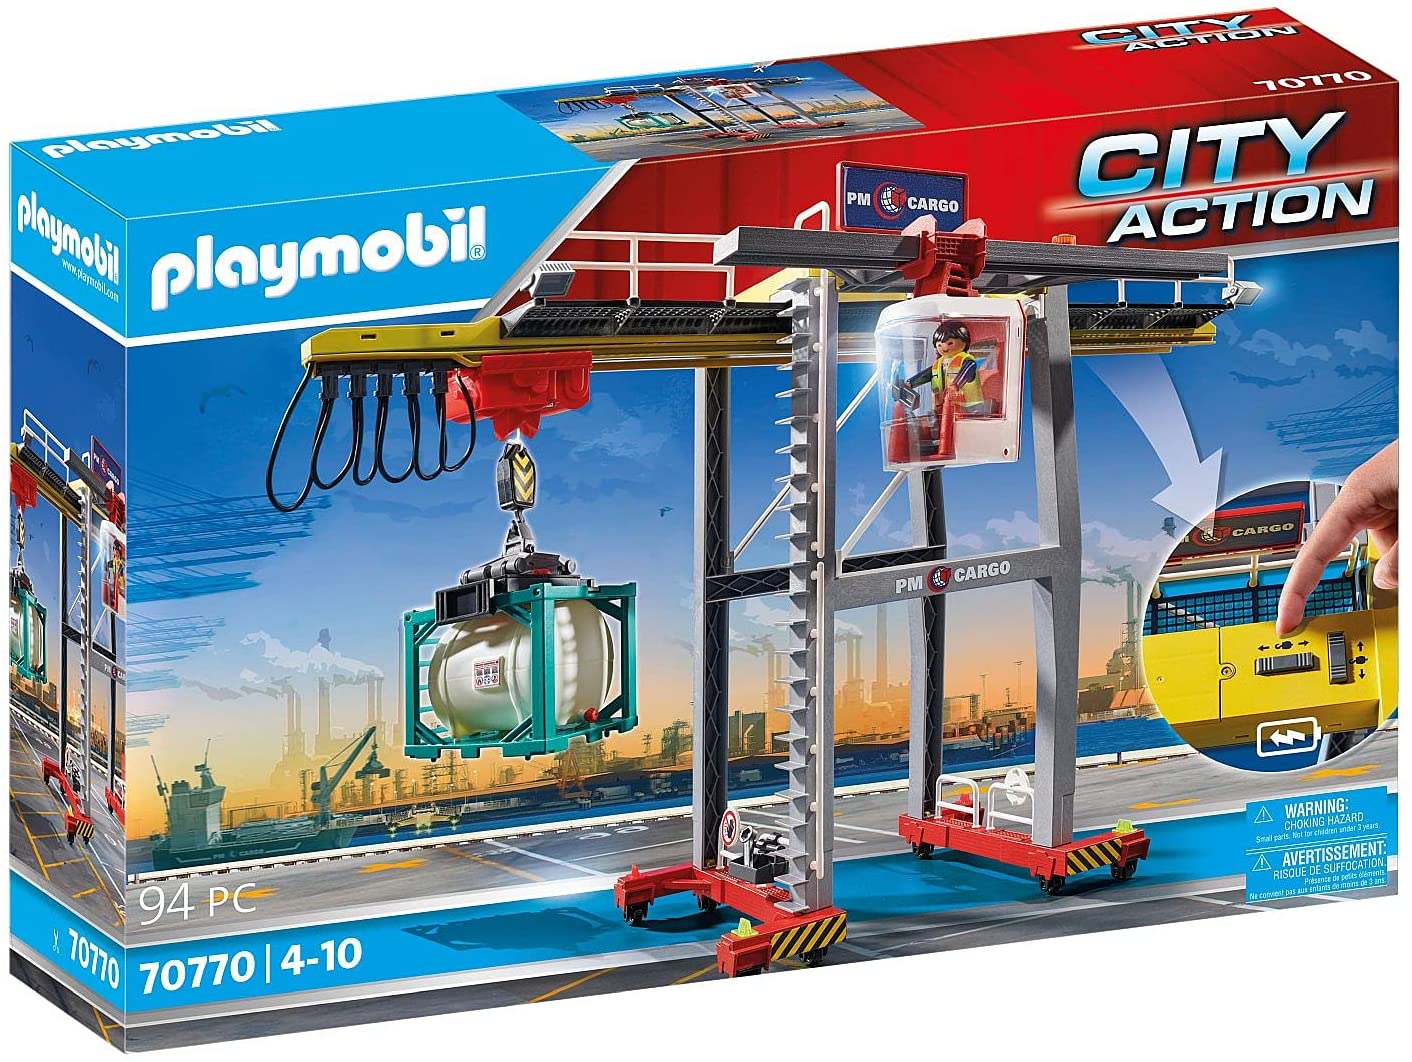 Playmobil City Action 70770 Portal Crane with Containers, Control Module an